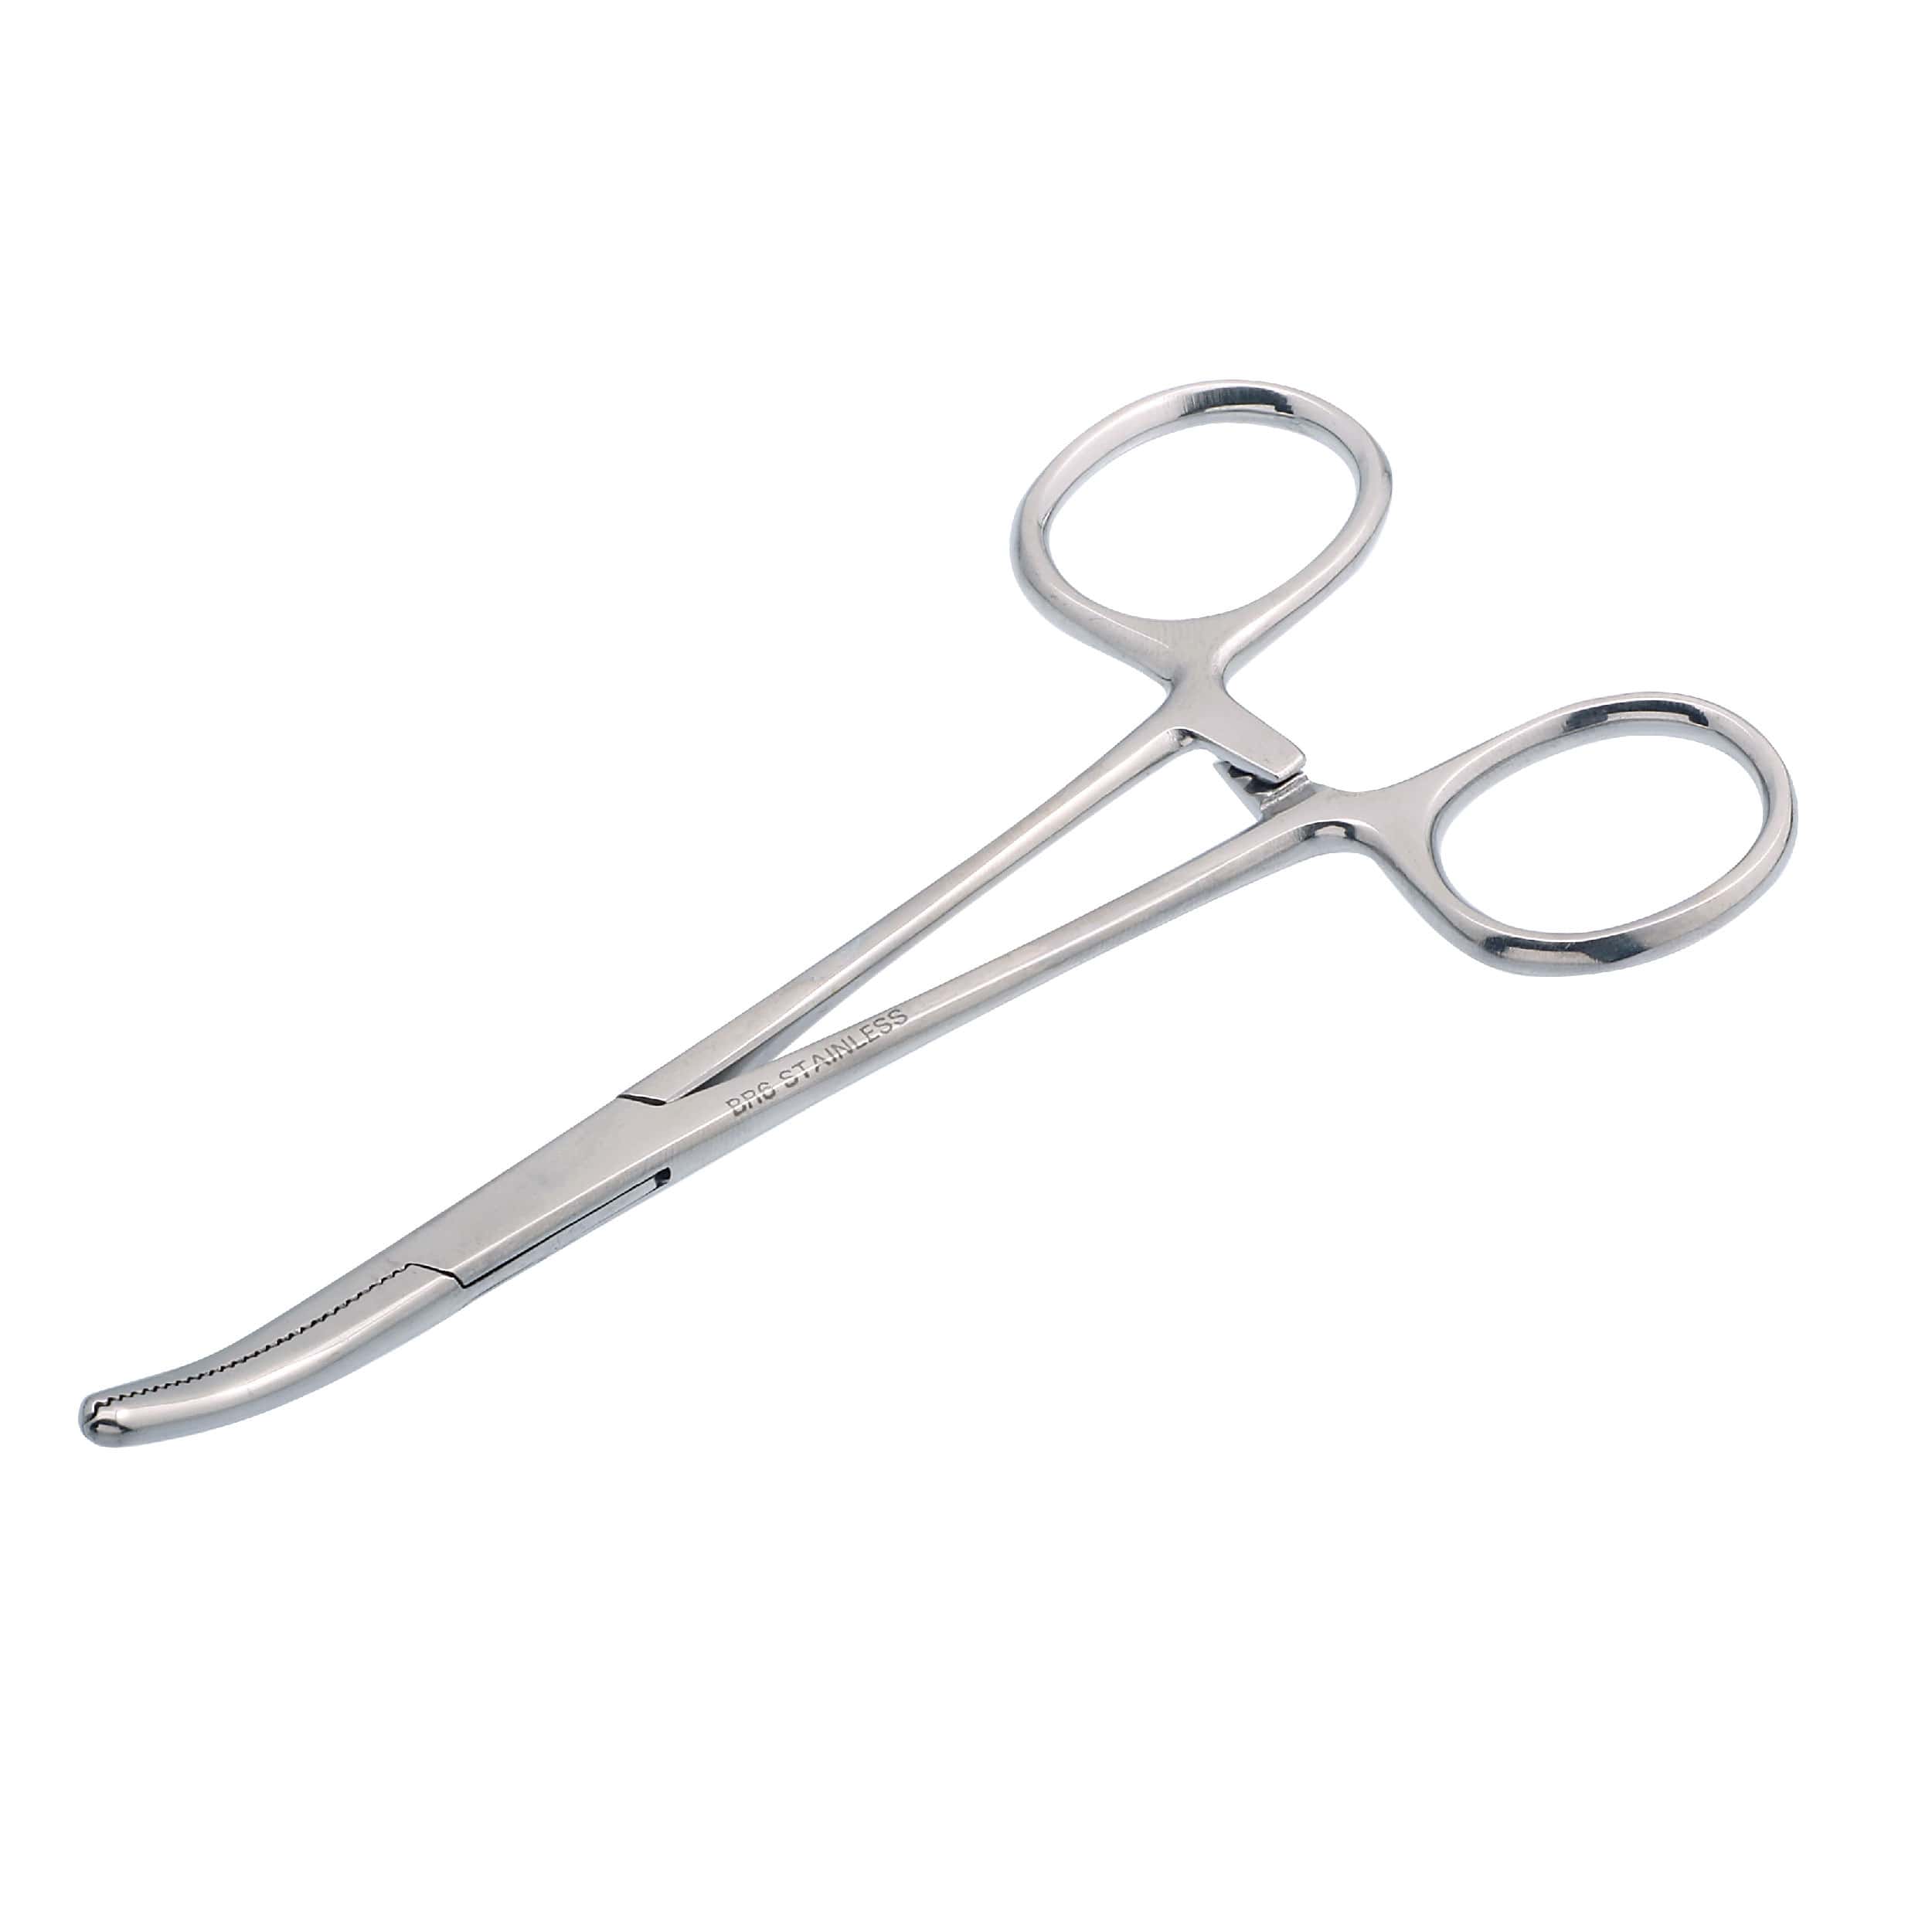 Spencer Wells Curved Artery Forceps